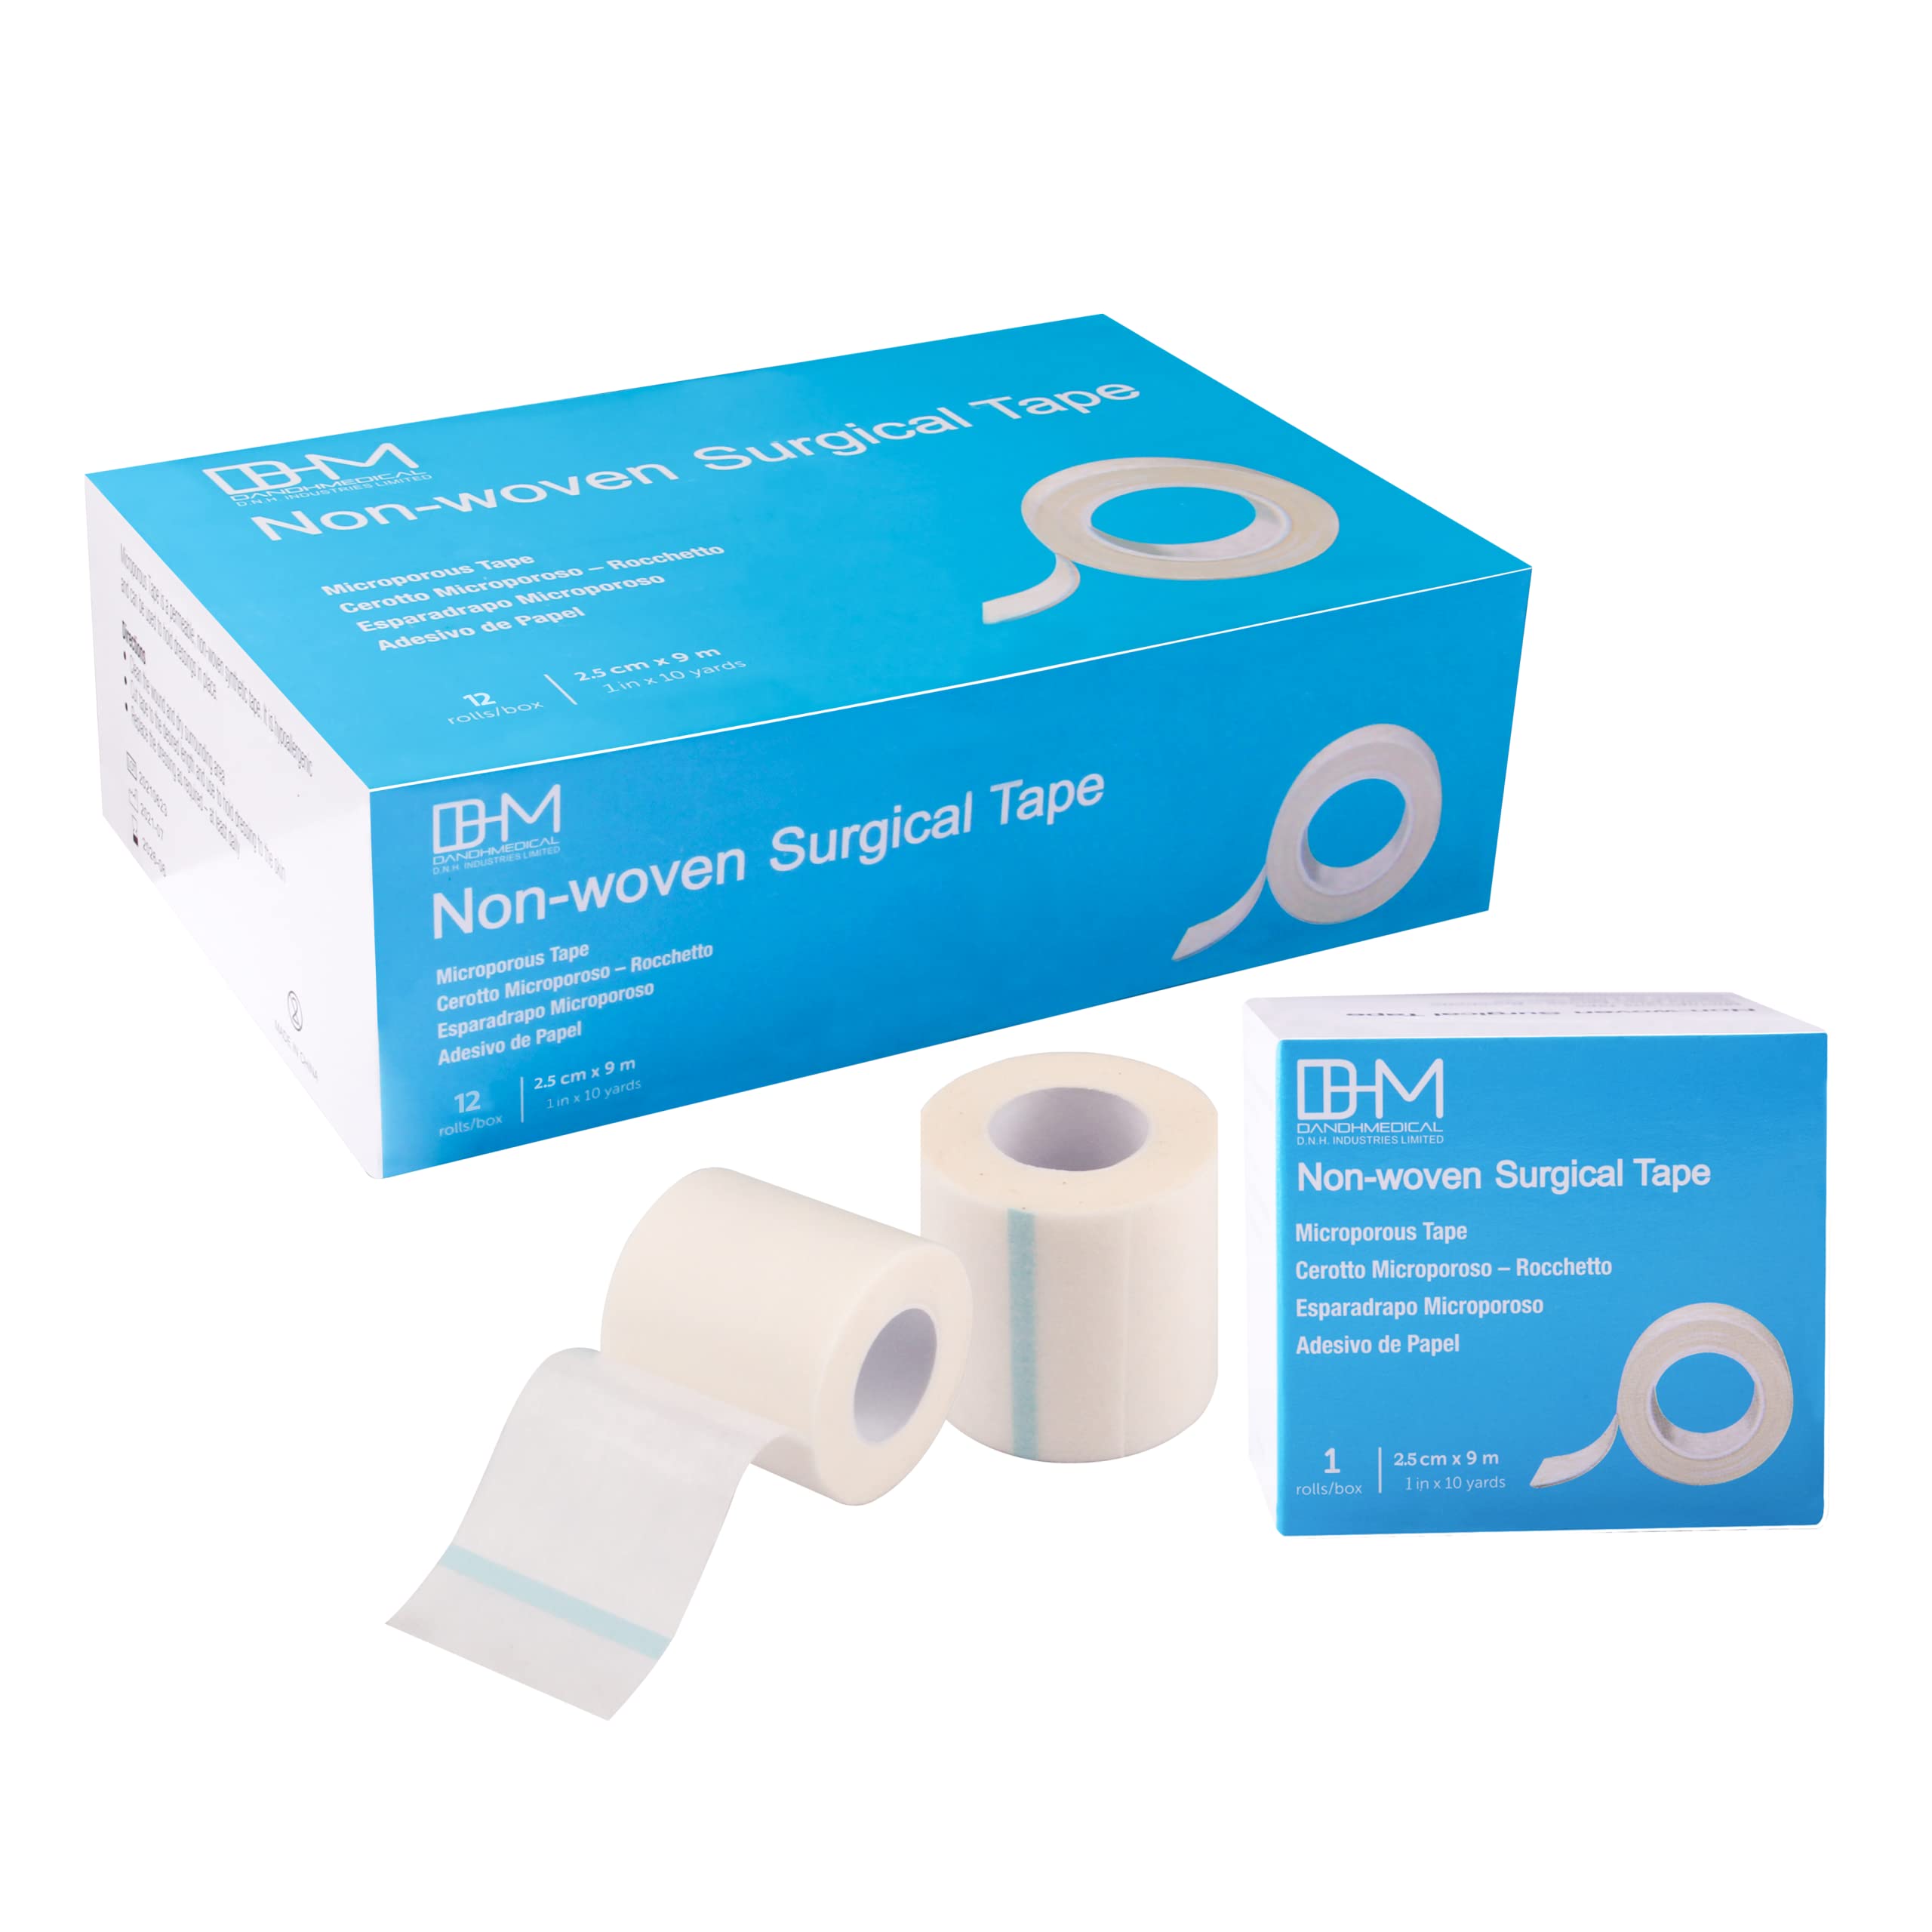 Looking to Buy McKesson Tape and Medical Supplies. Here are the Top 10 Tips to Save Big